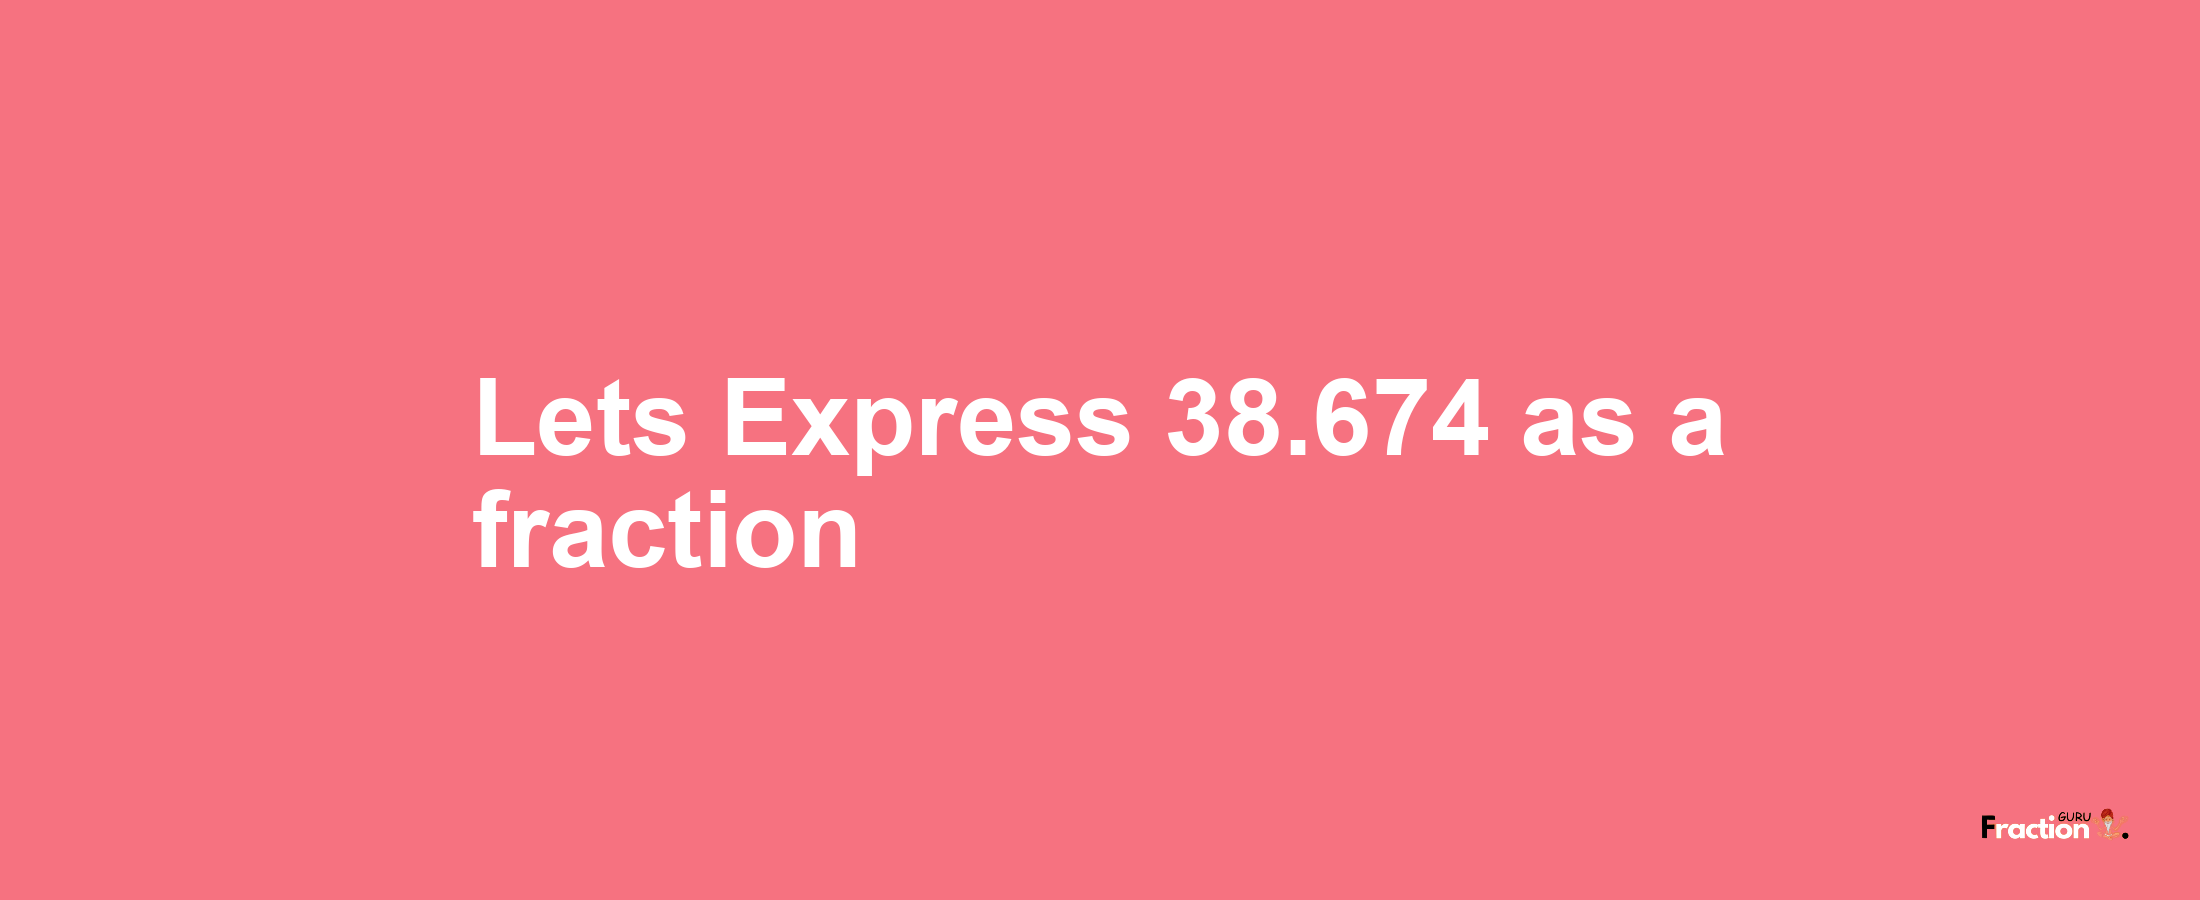 Lets Express 38.674 as afraction